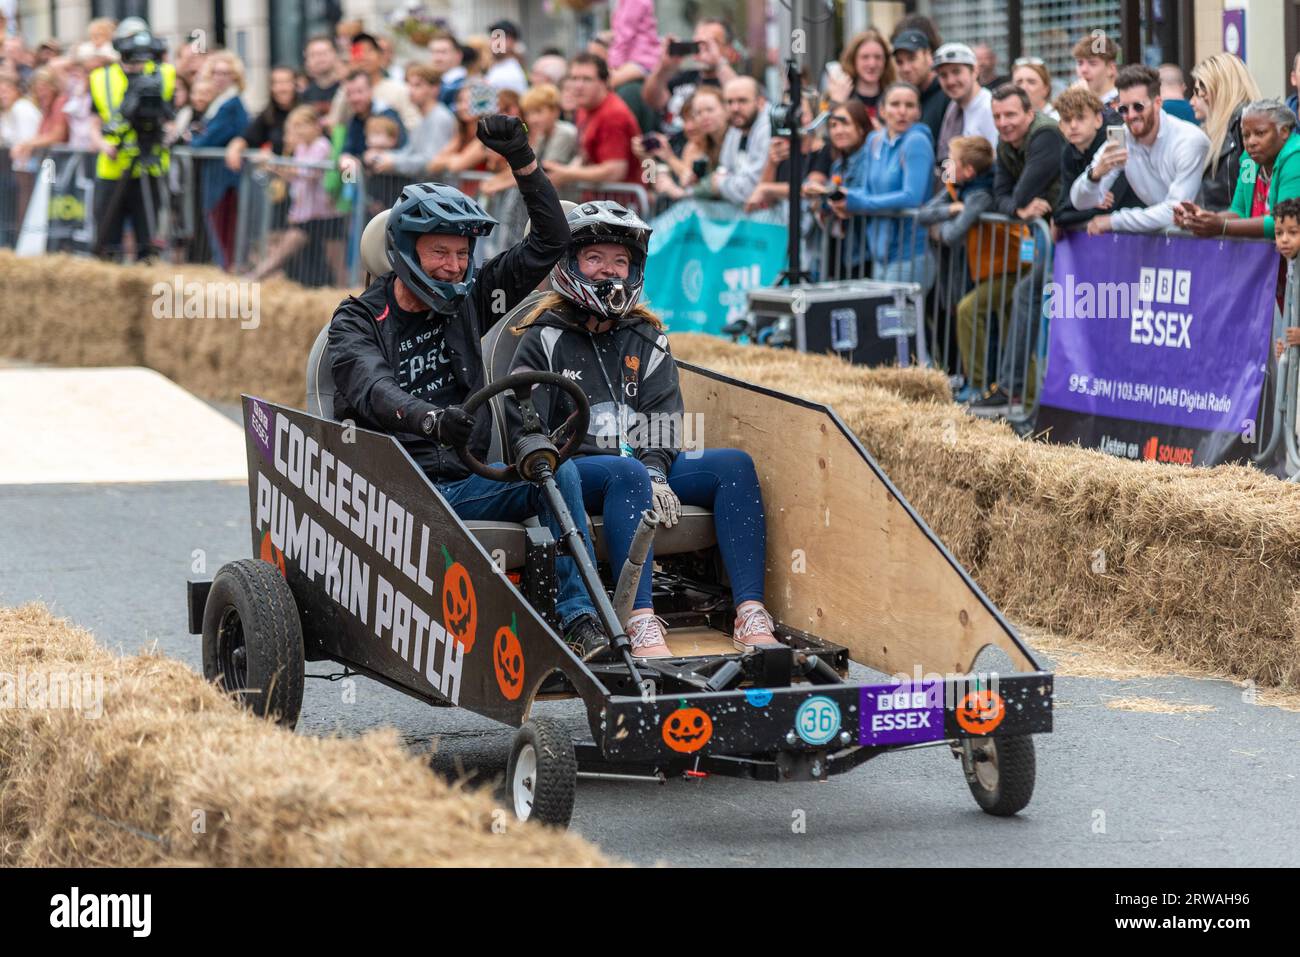 Colchester Soapbox Rally. Soapbox derby gravity racing in the High Street of Colchester, Essex, UK. Entry 36, Coggeshall Pumpkin Patch Stock Photo